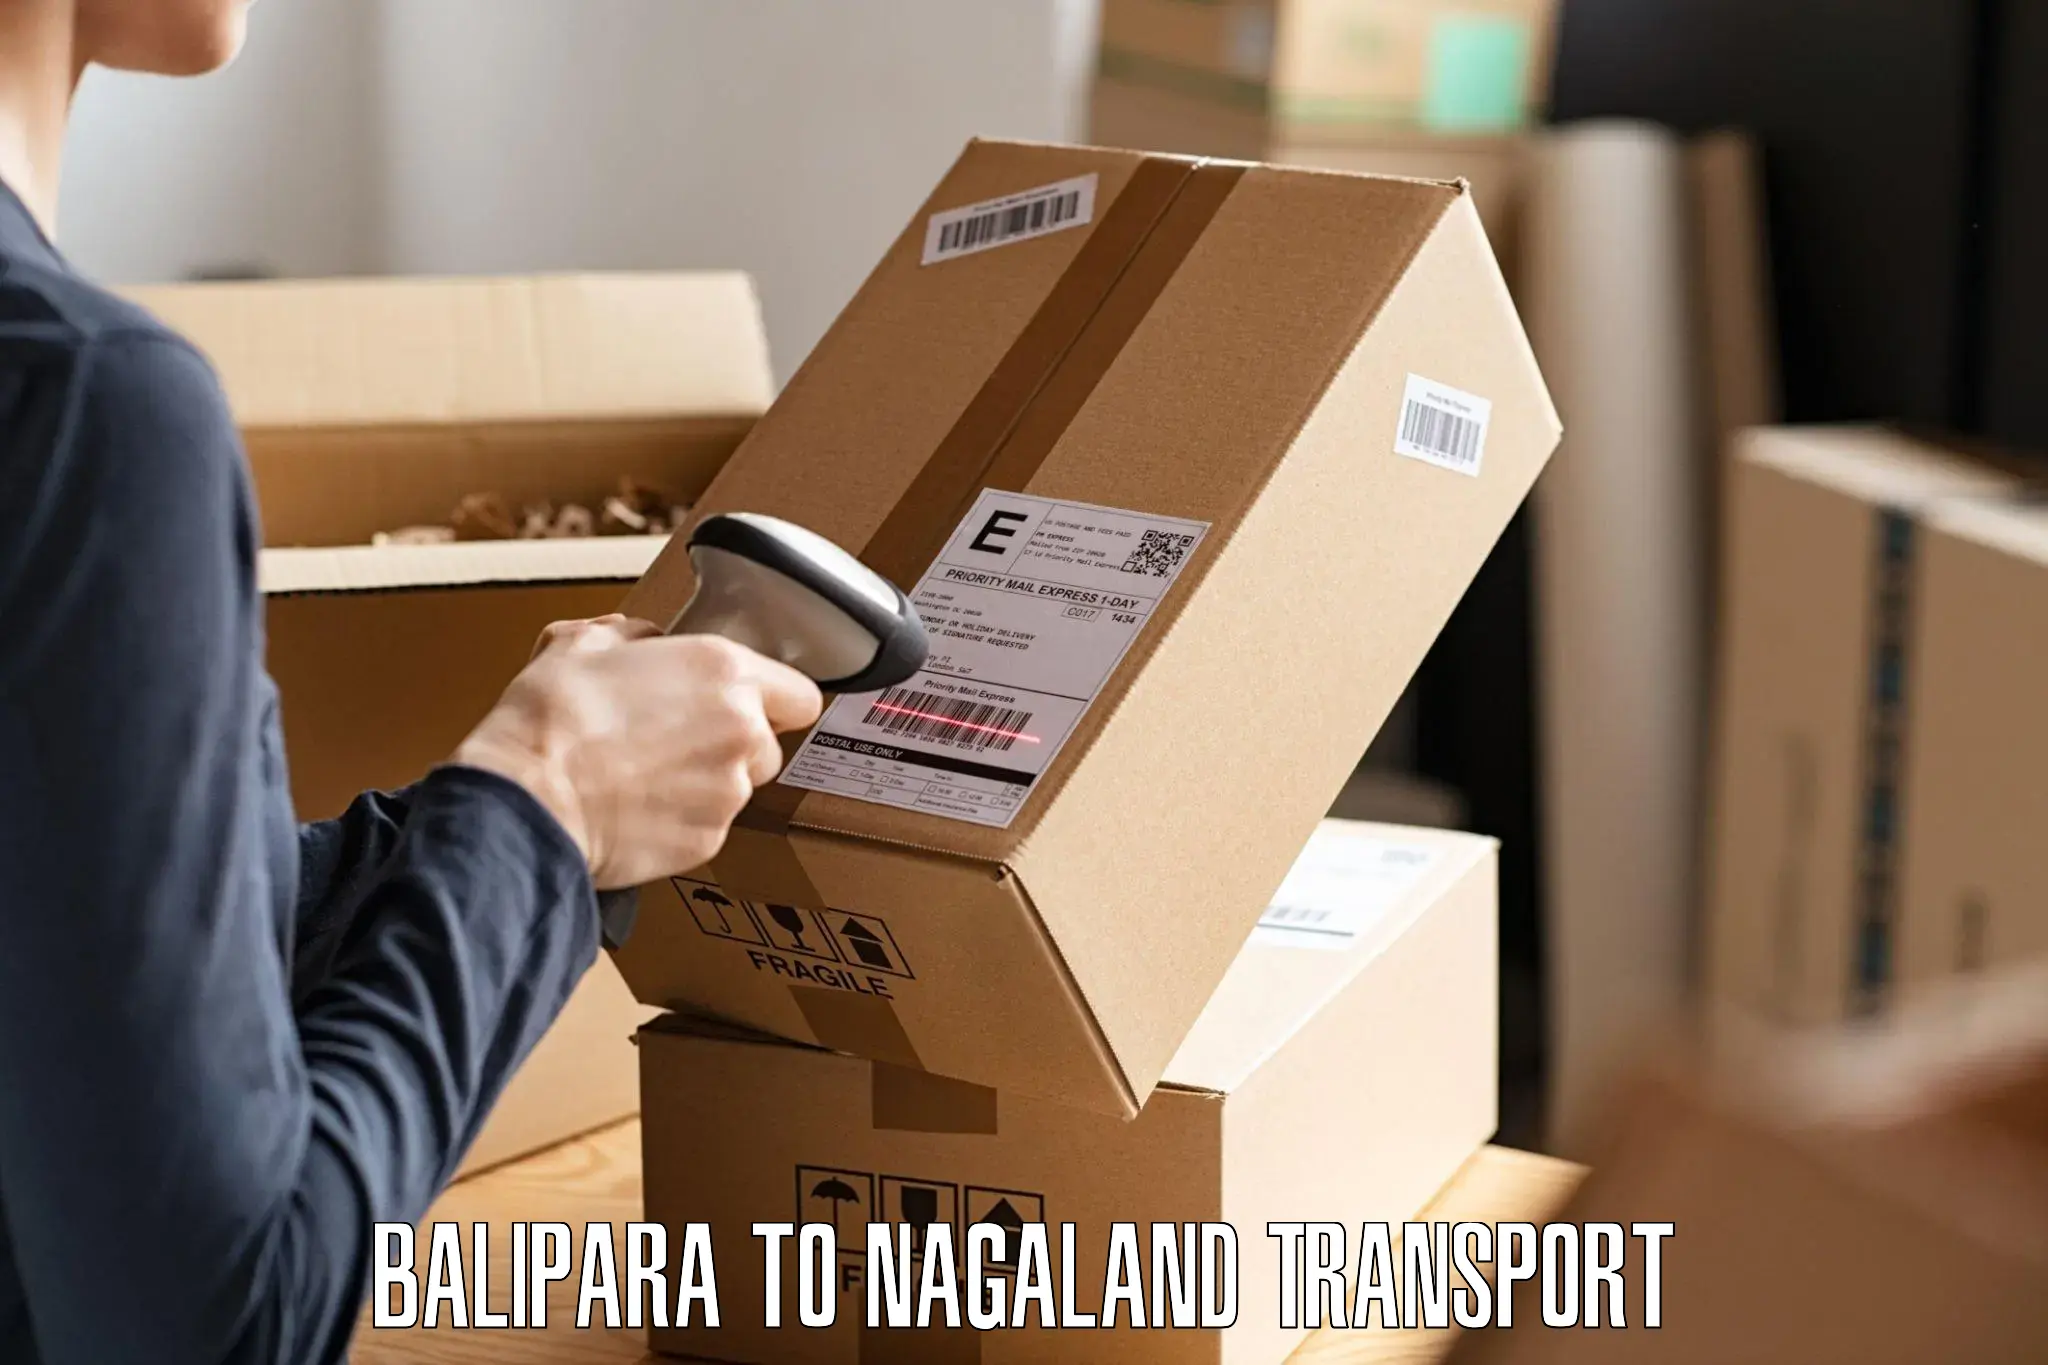 Daily parcel service transport Balipara to Dimapur